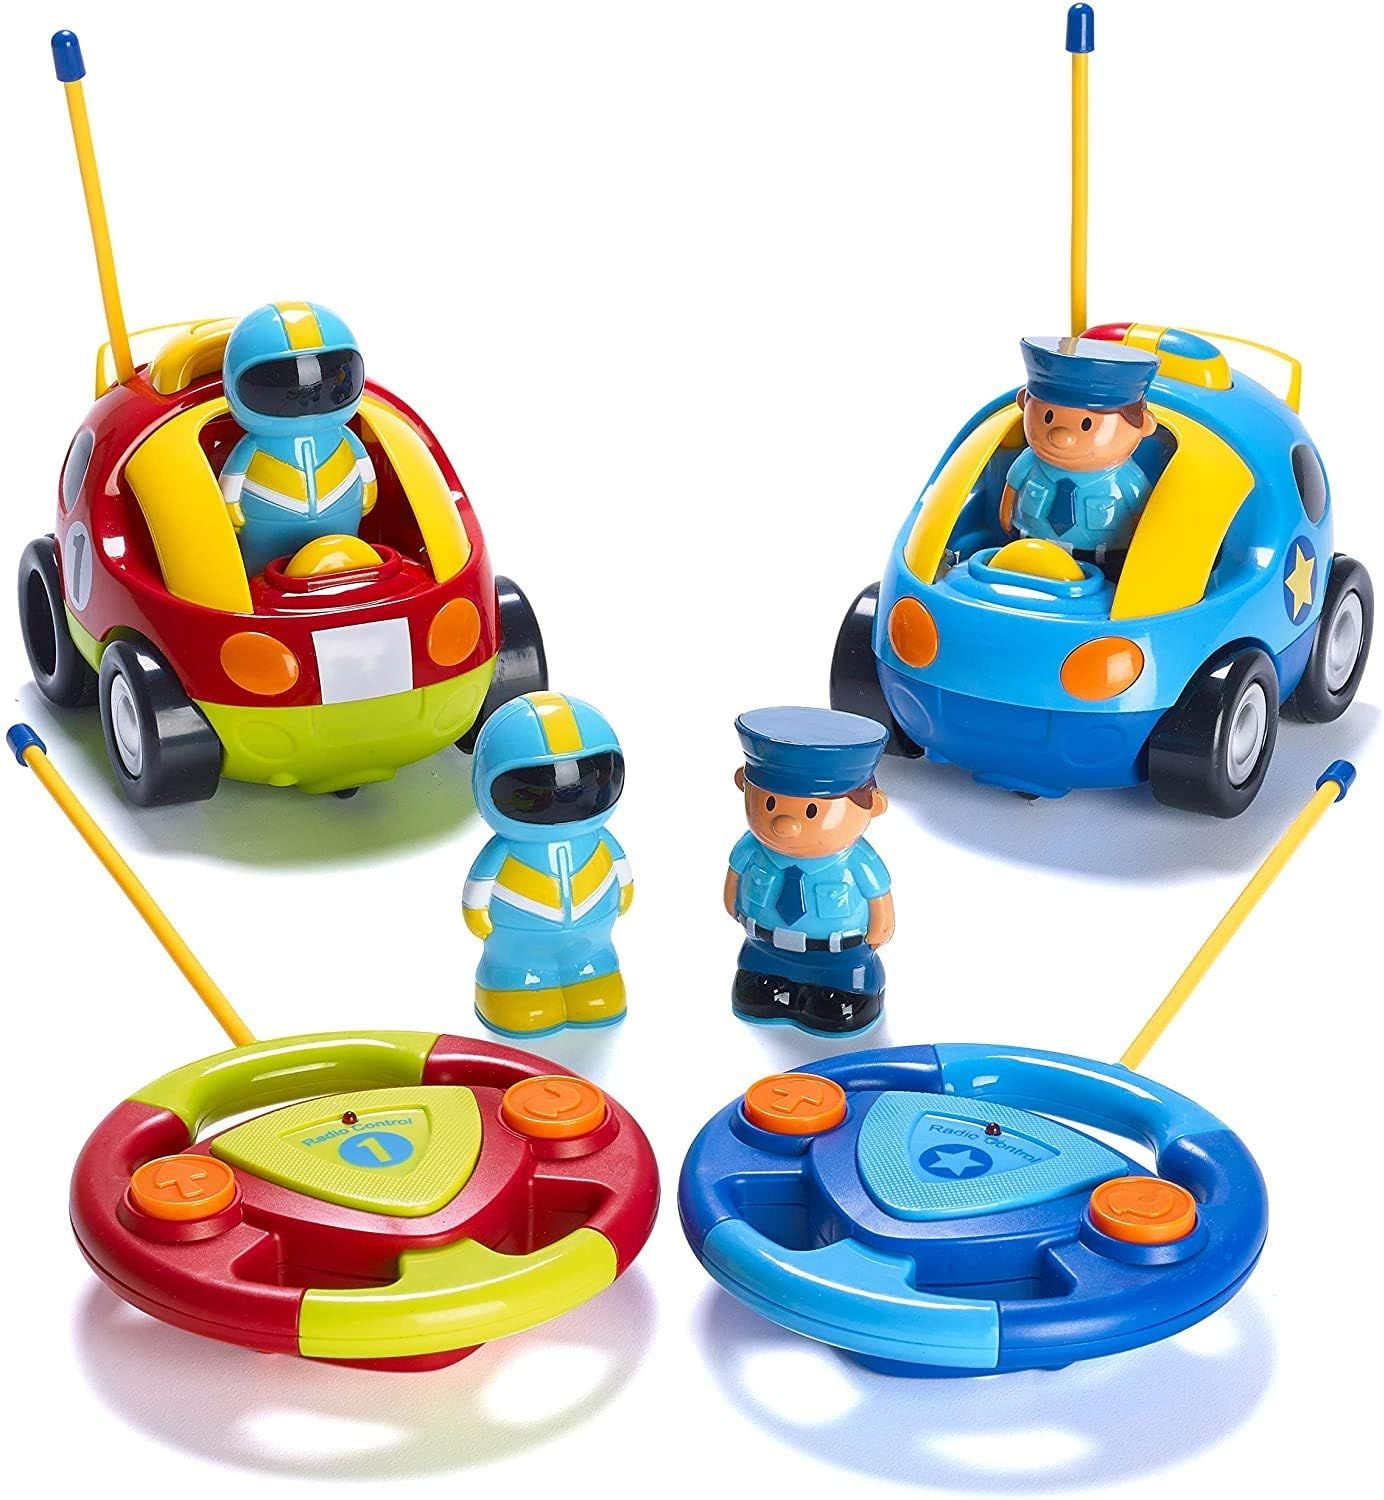 2 Pack Cartoon Remote Control Cars - Police Car and Race Car - Radio Control Toys for Kids, Boys, &  | Amazon (US)